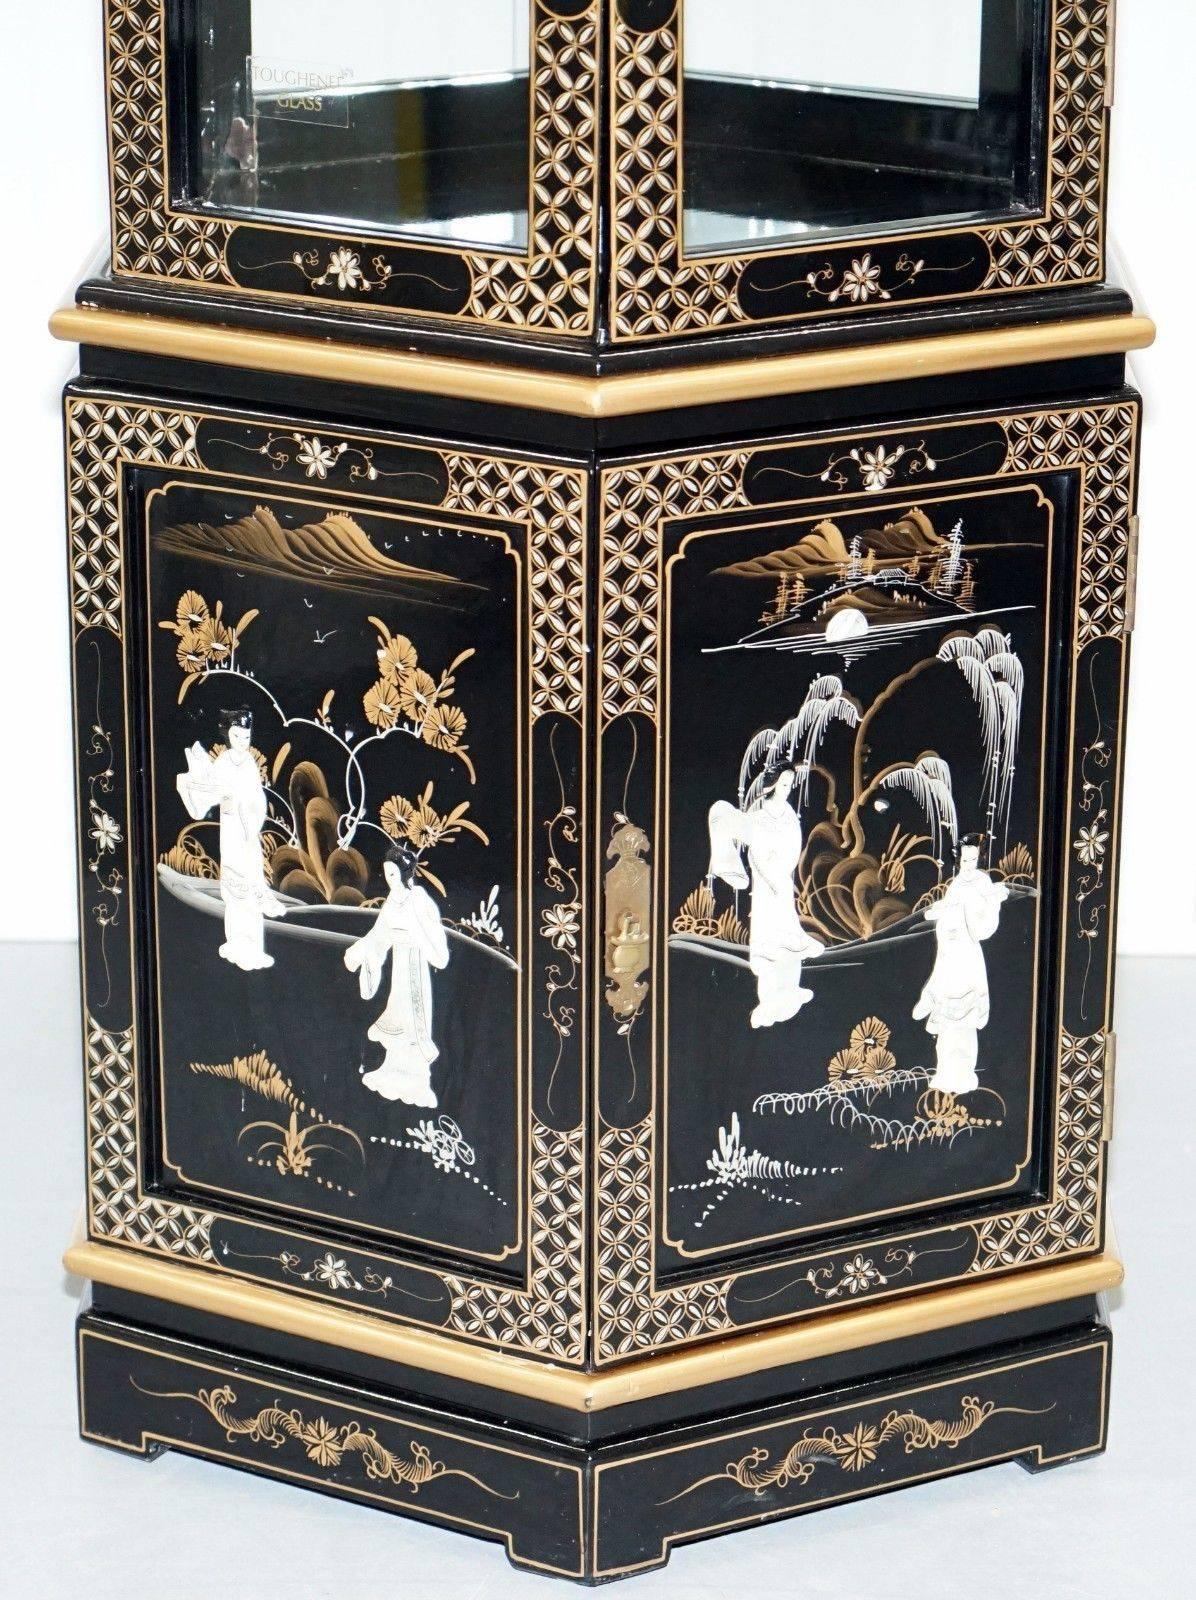 We are delighted to offer for sale this lovely hand made in China black lacquered display cabinet

Expertly crafted, the detail is sublime, its gold leaf painted with mother-of-pearl inlay, ab exceptionally high quality and decorative piece.

We